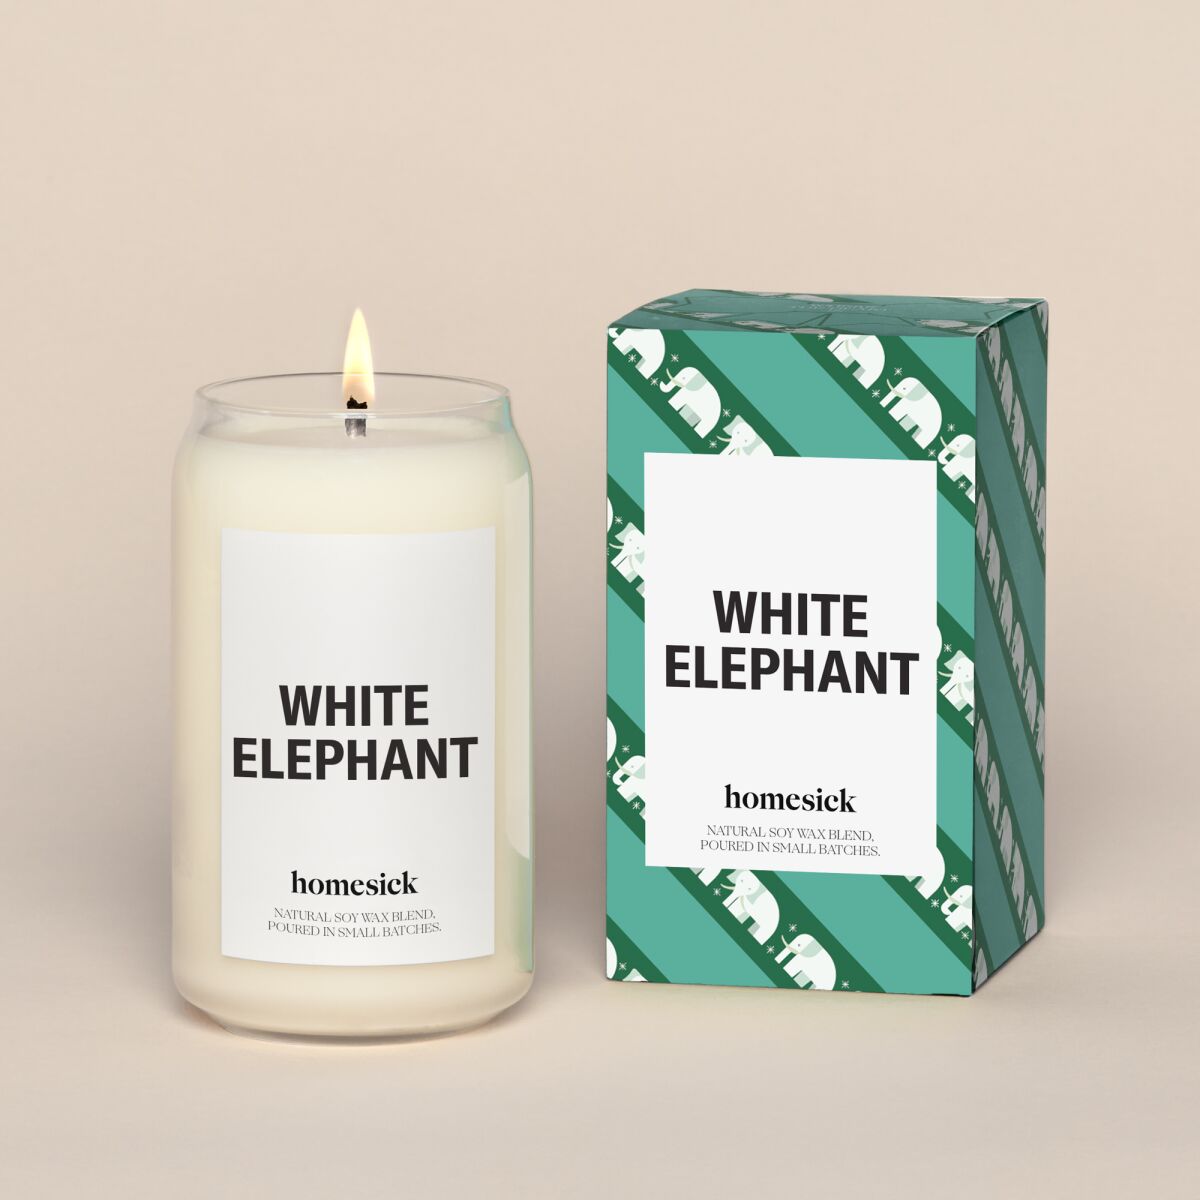 A candle in a glass jar next to a green and white patterned box. The label on both reads "White Elephant."